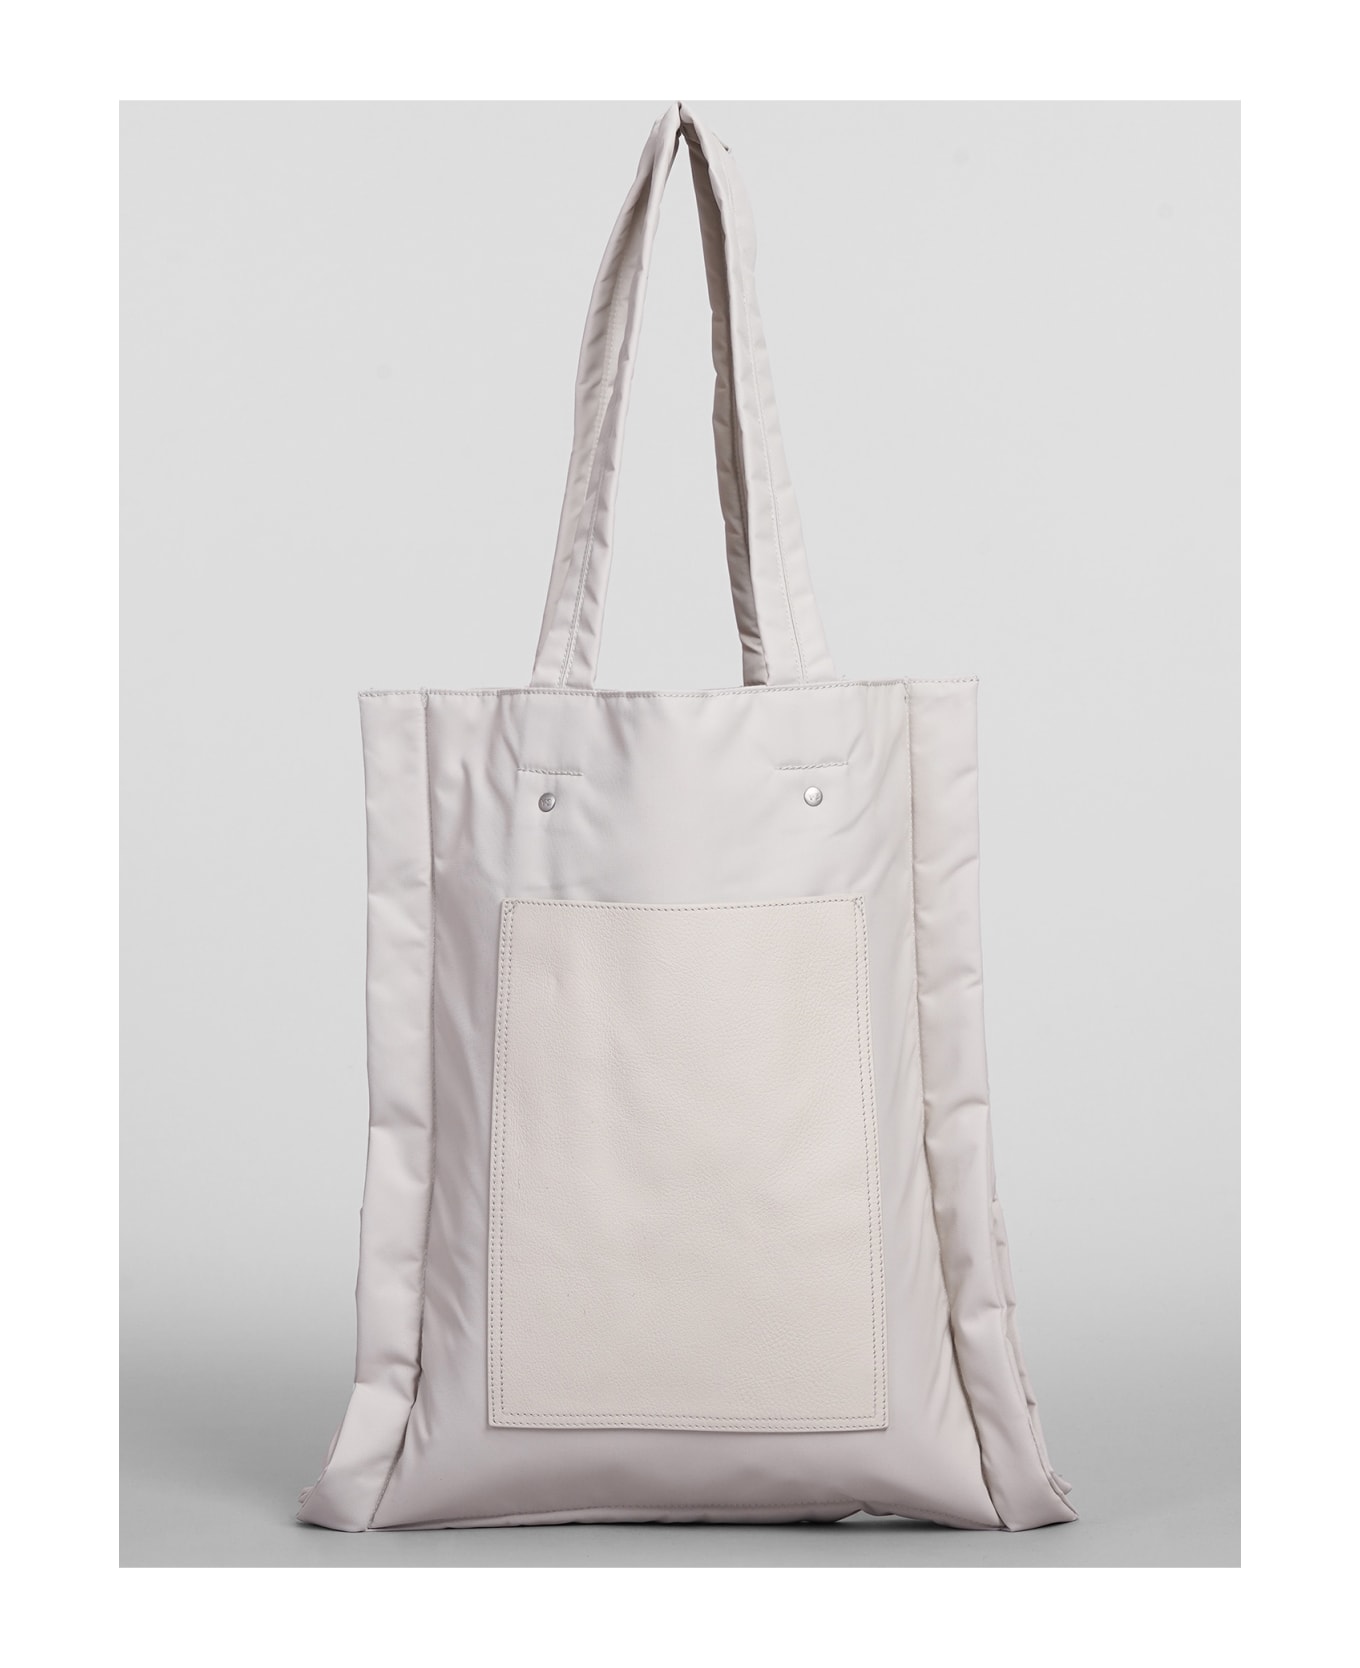 Y-3 Lux Flat Tote Bag トートバッグ